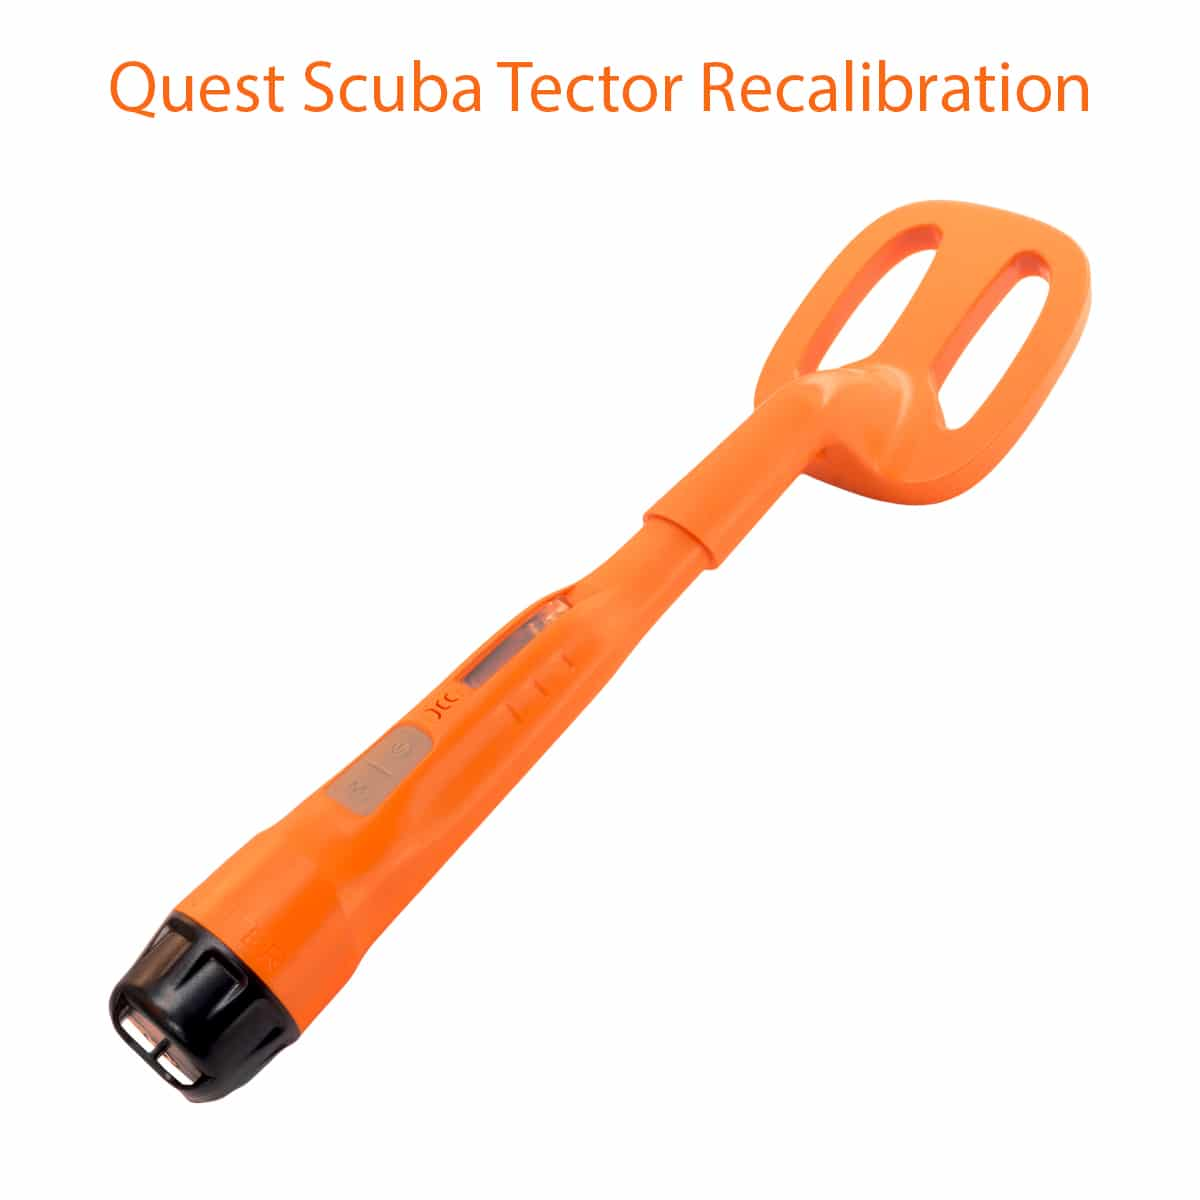 How To Re-calibrate Your Quest Scuba Tector